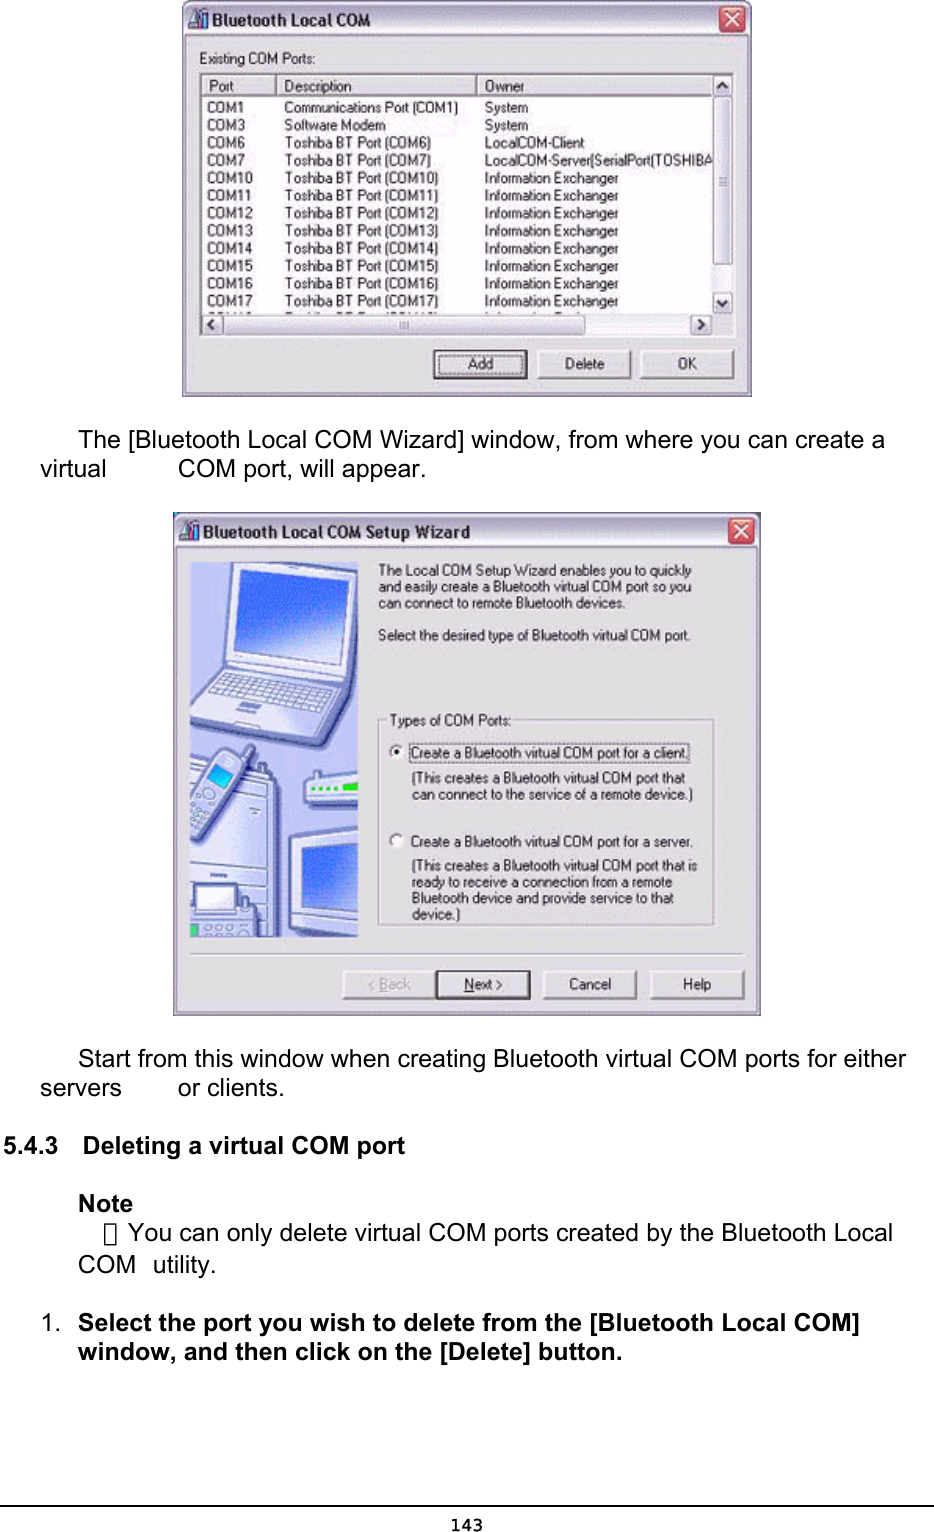         The [Bluetooth Local COM Wizard] window, from where you can create a virtual     COM port, will appear.        Start from this window when creating Bluetooth virtual COM ports for either servers     or clients. 5.4.3  Deleting a virtual COM port Note  ．You can only delete virtual COM ports created by the Bluetooth Local COM  utility. 1.  Select the port you wish to delete from the [Bluetooth Local COM] window, and then click on the [Delete] button.  143